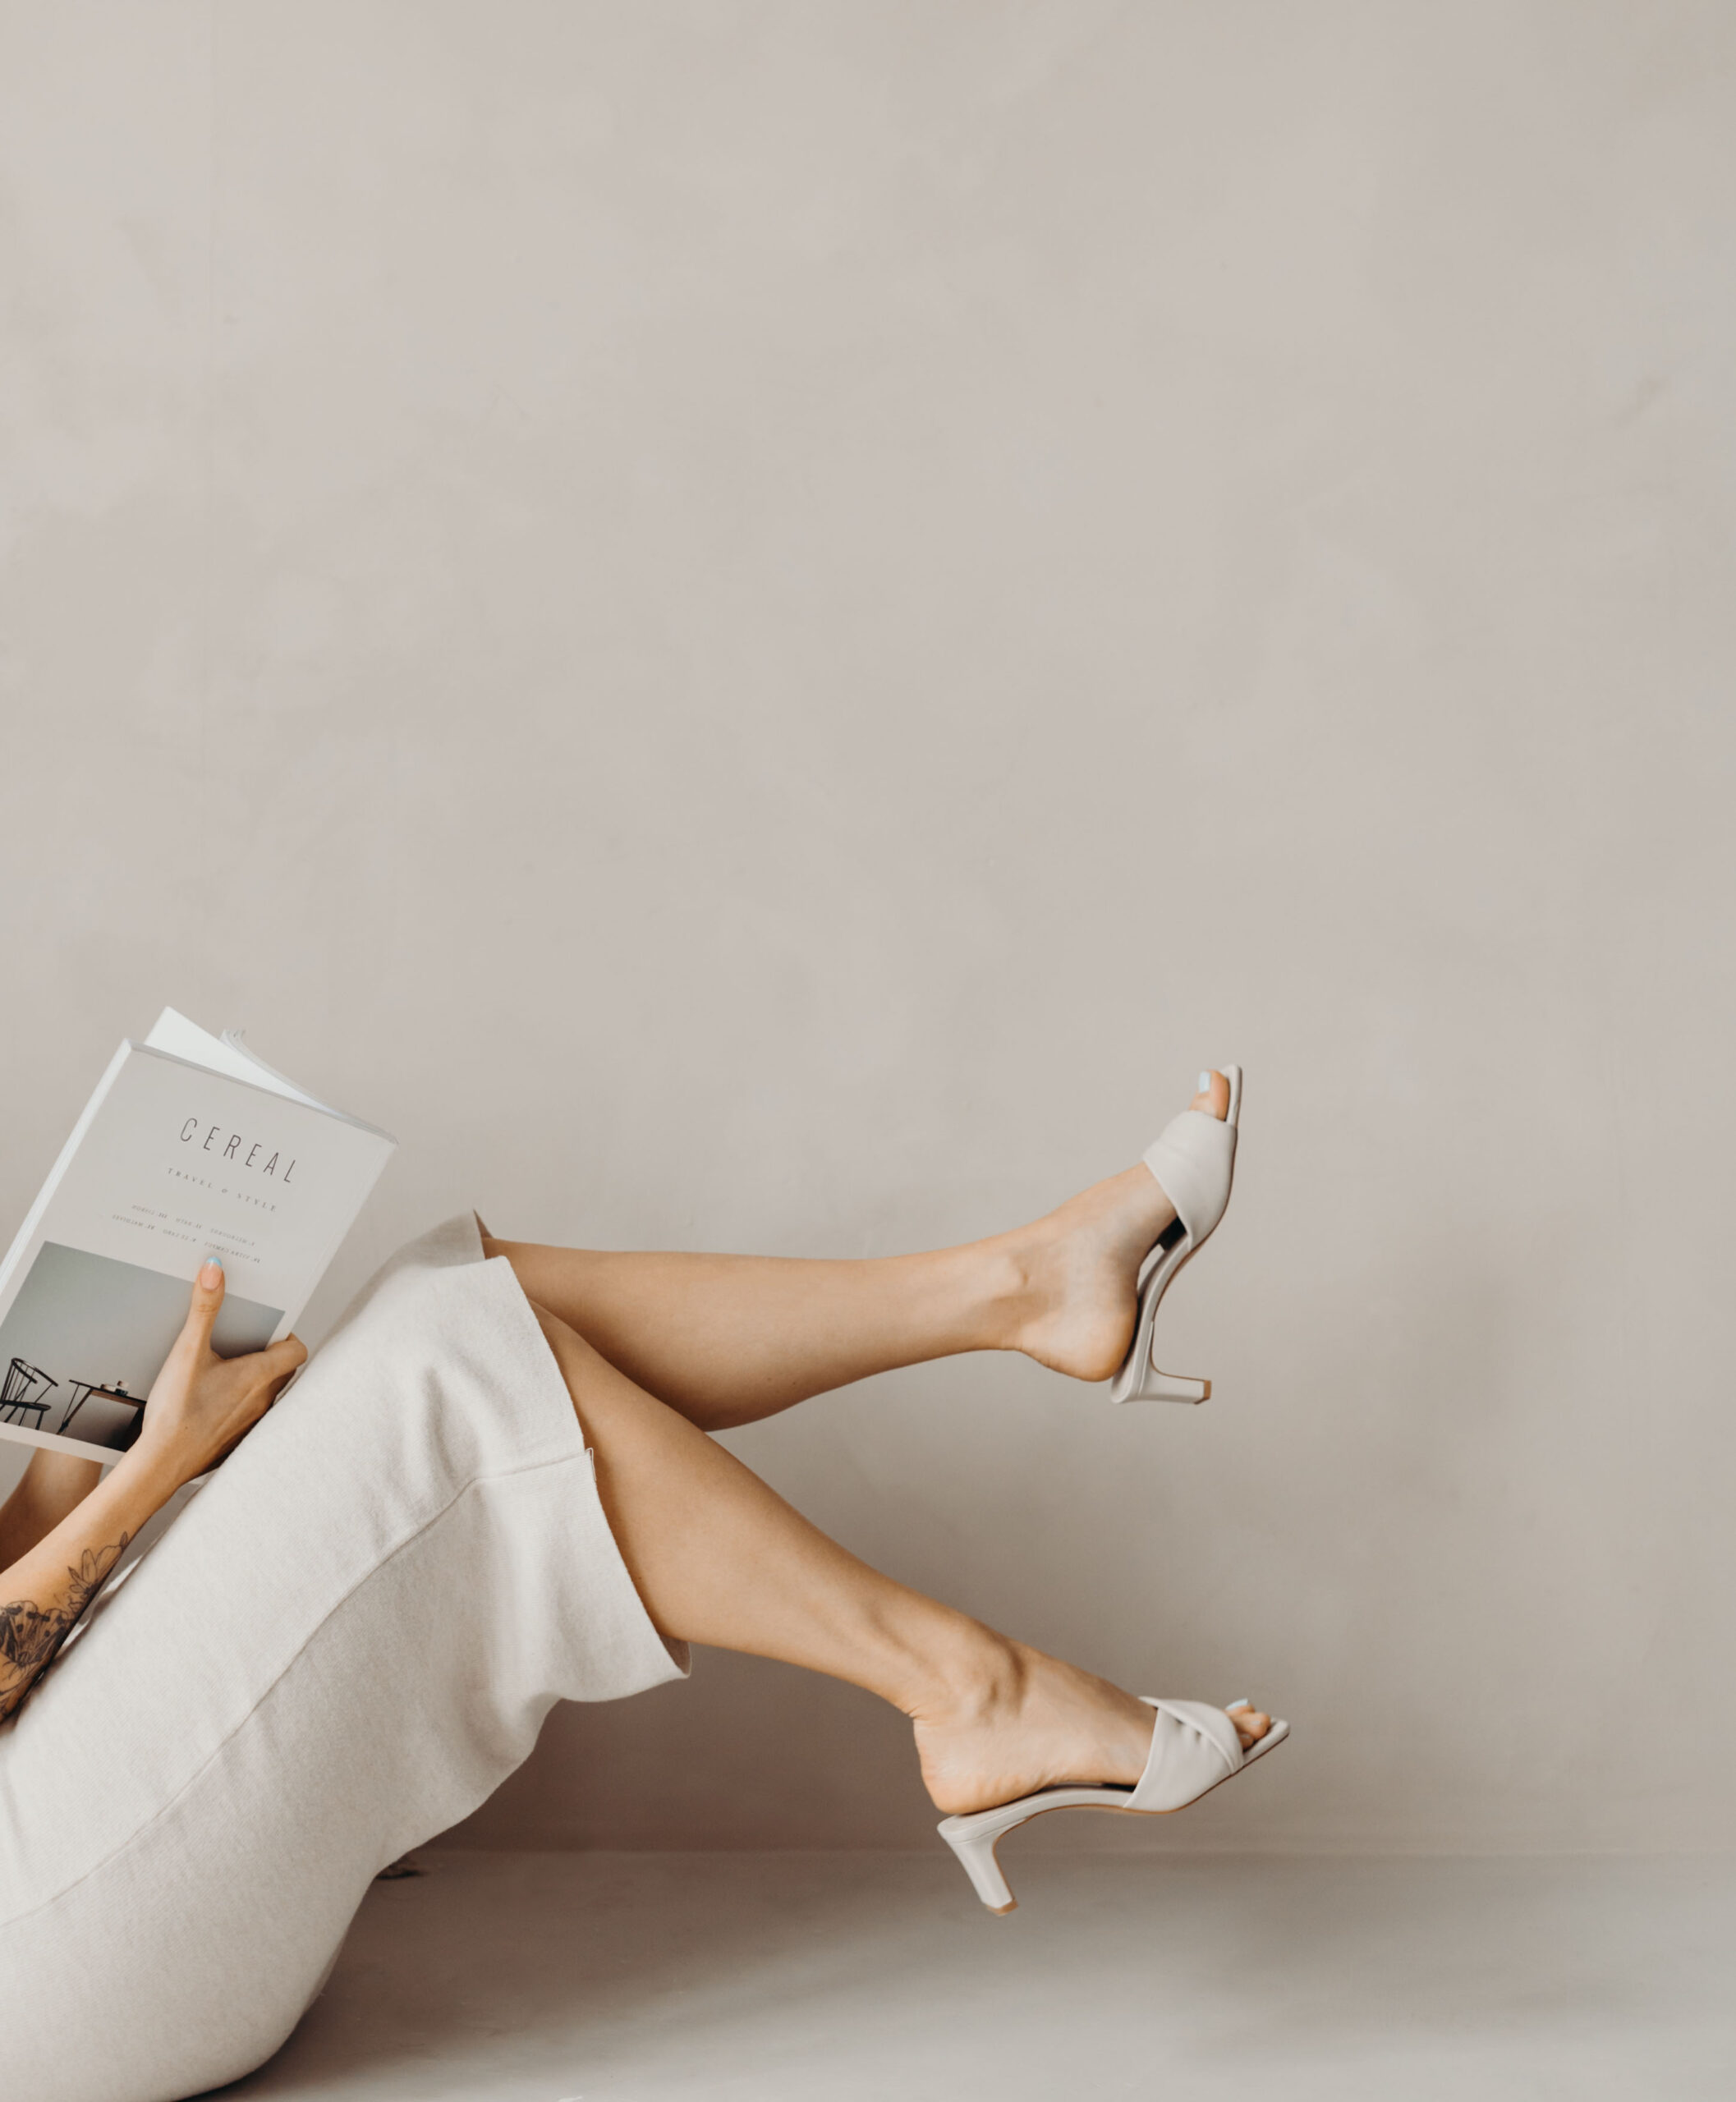 Relaxed business woman in a beige outfit with her feet up, reading a magazine.